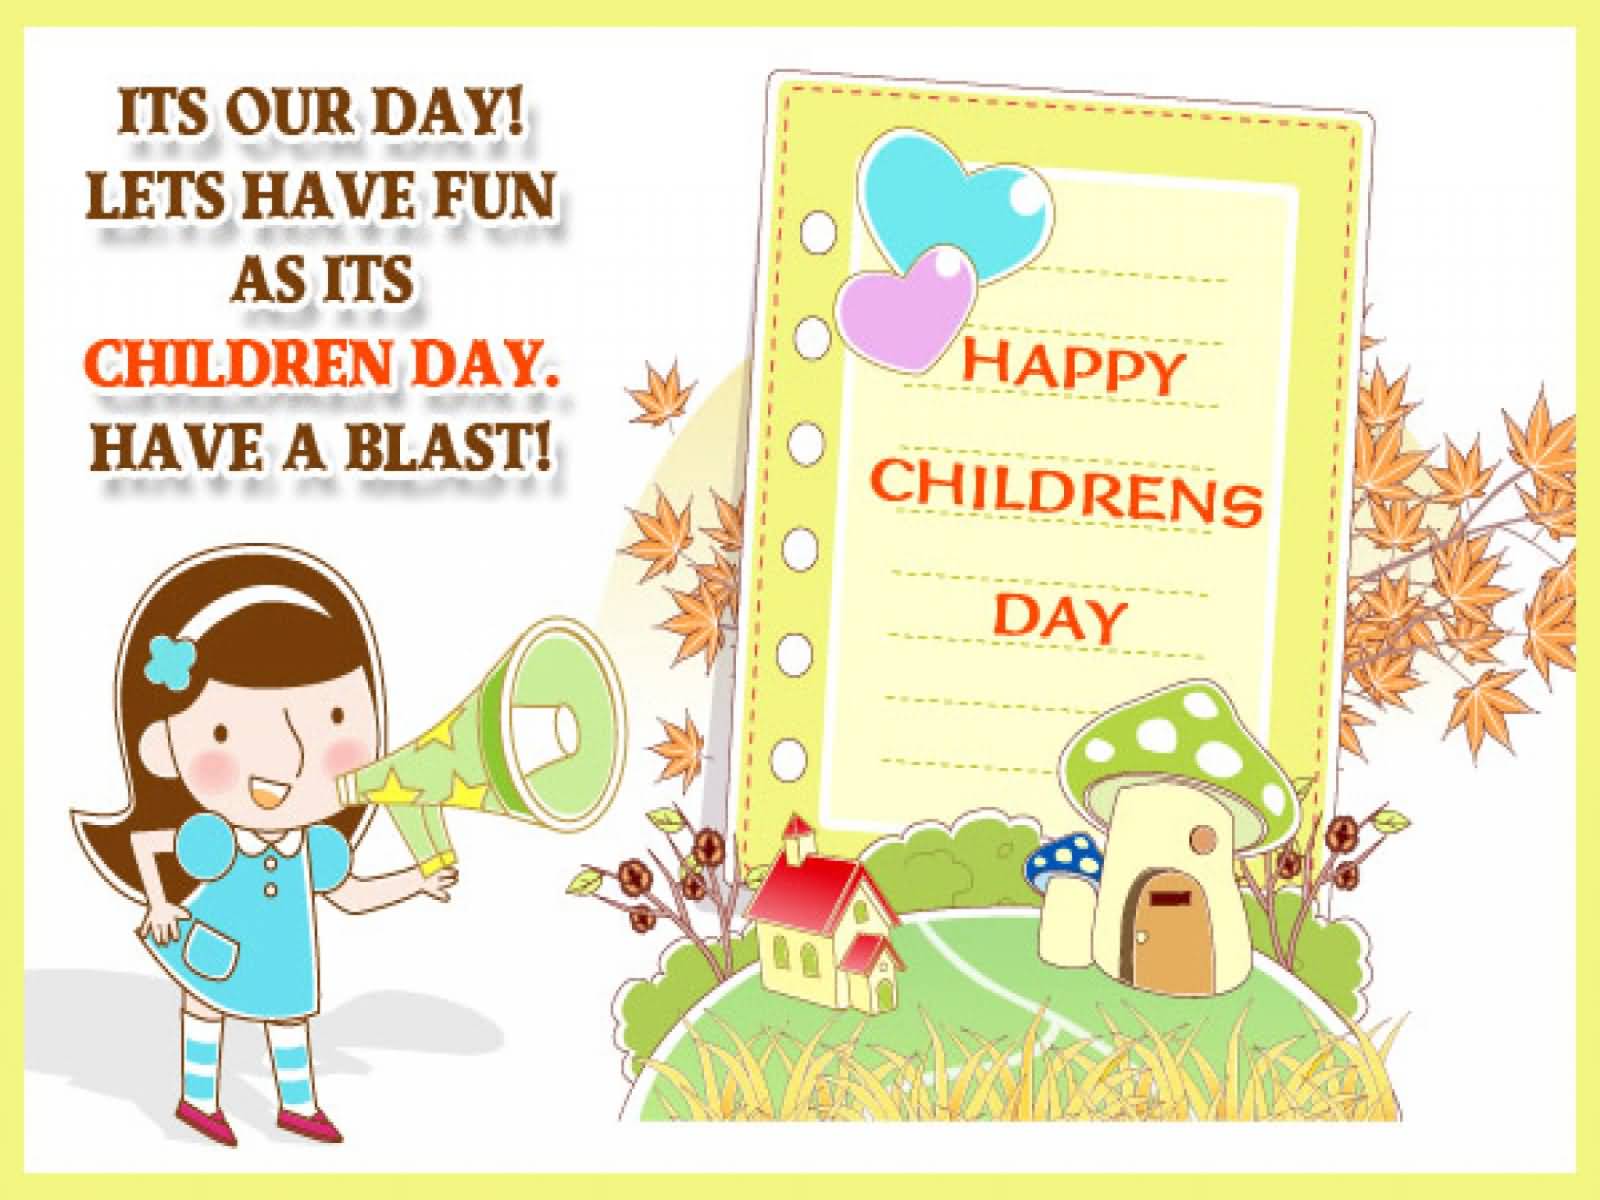 It’s Our Day Lets have Fun As Its Children Day Have A Blast happy Children’s Day